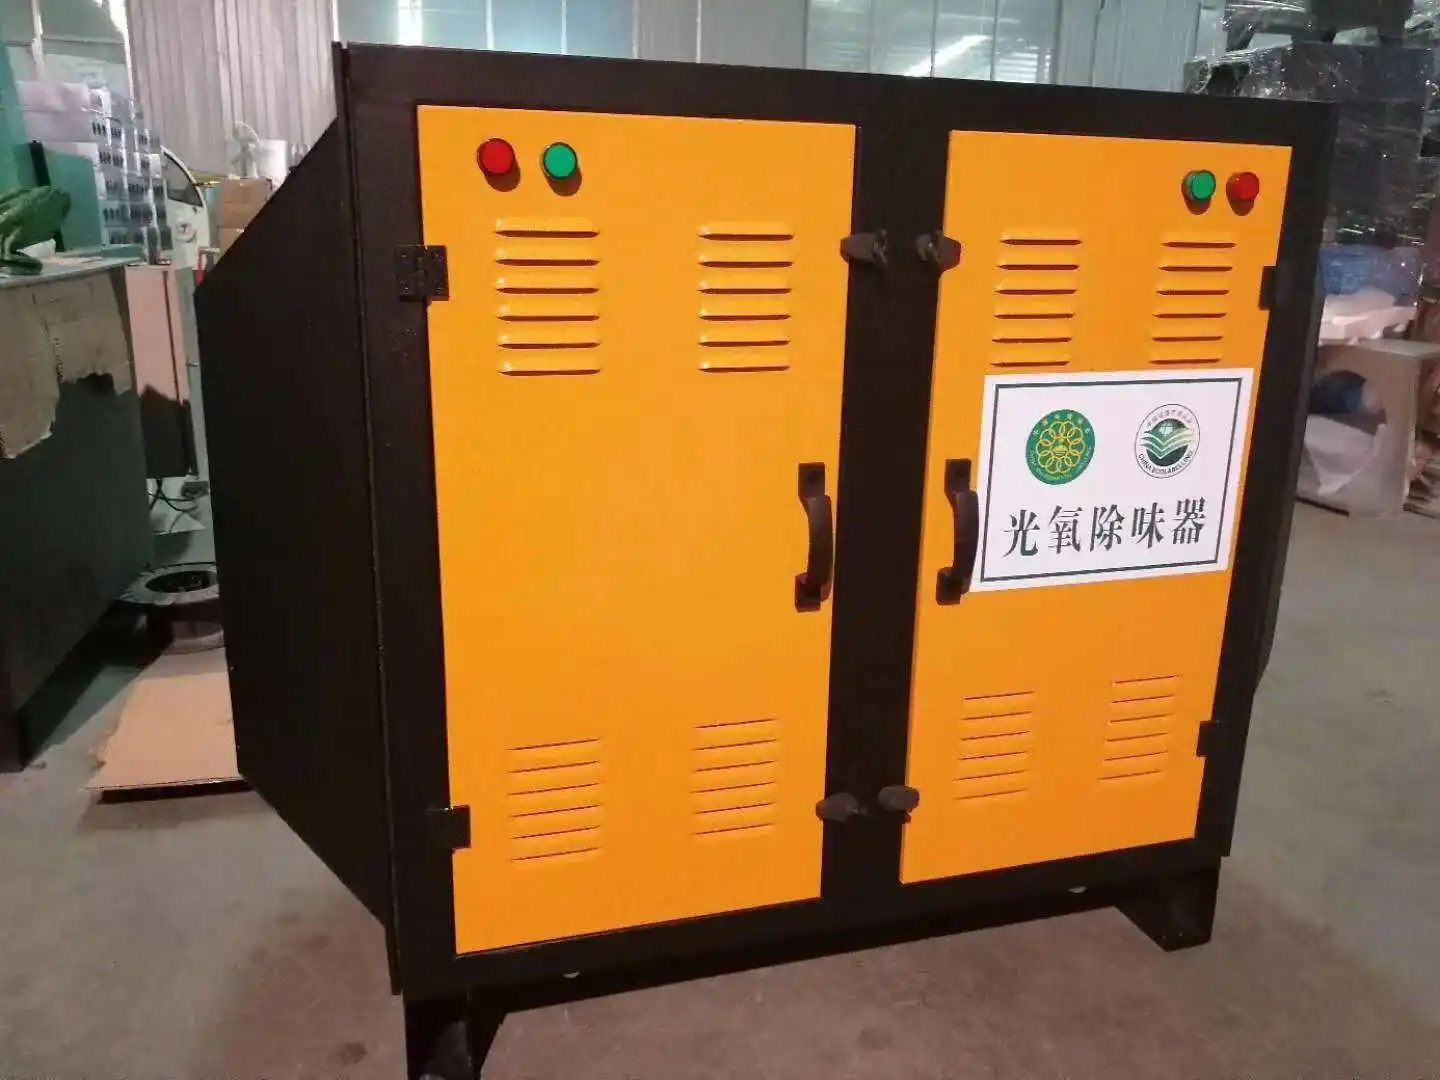 China Oil Fume Purifier manufacturers and Suppliers